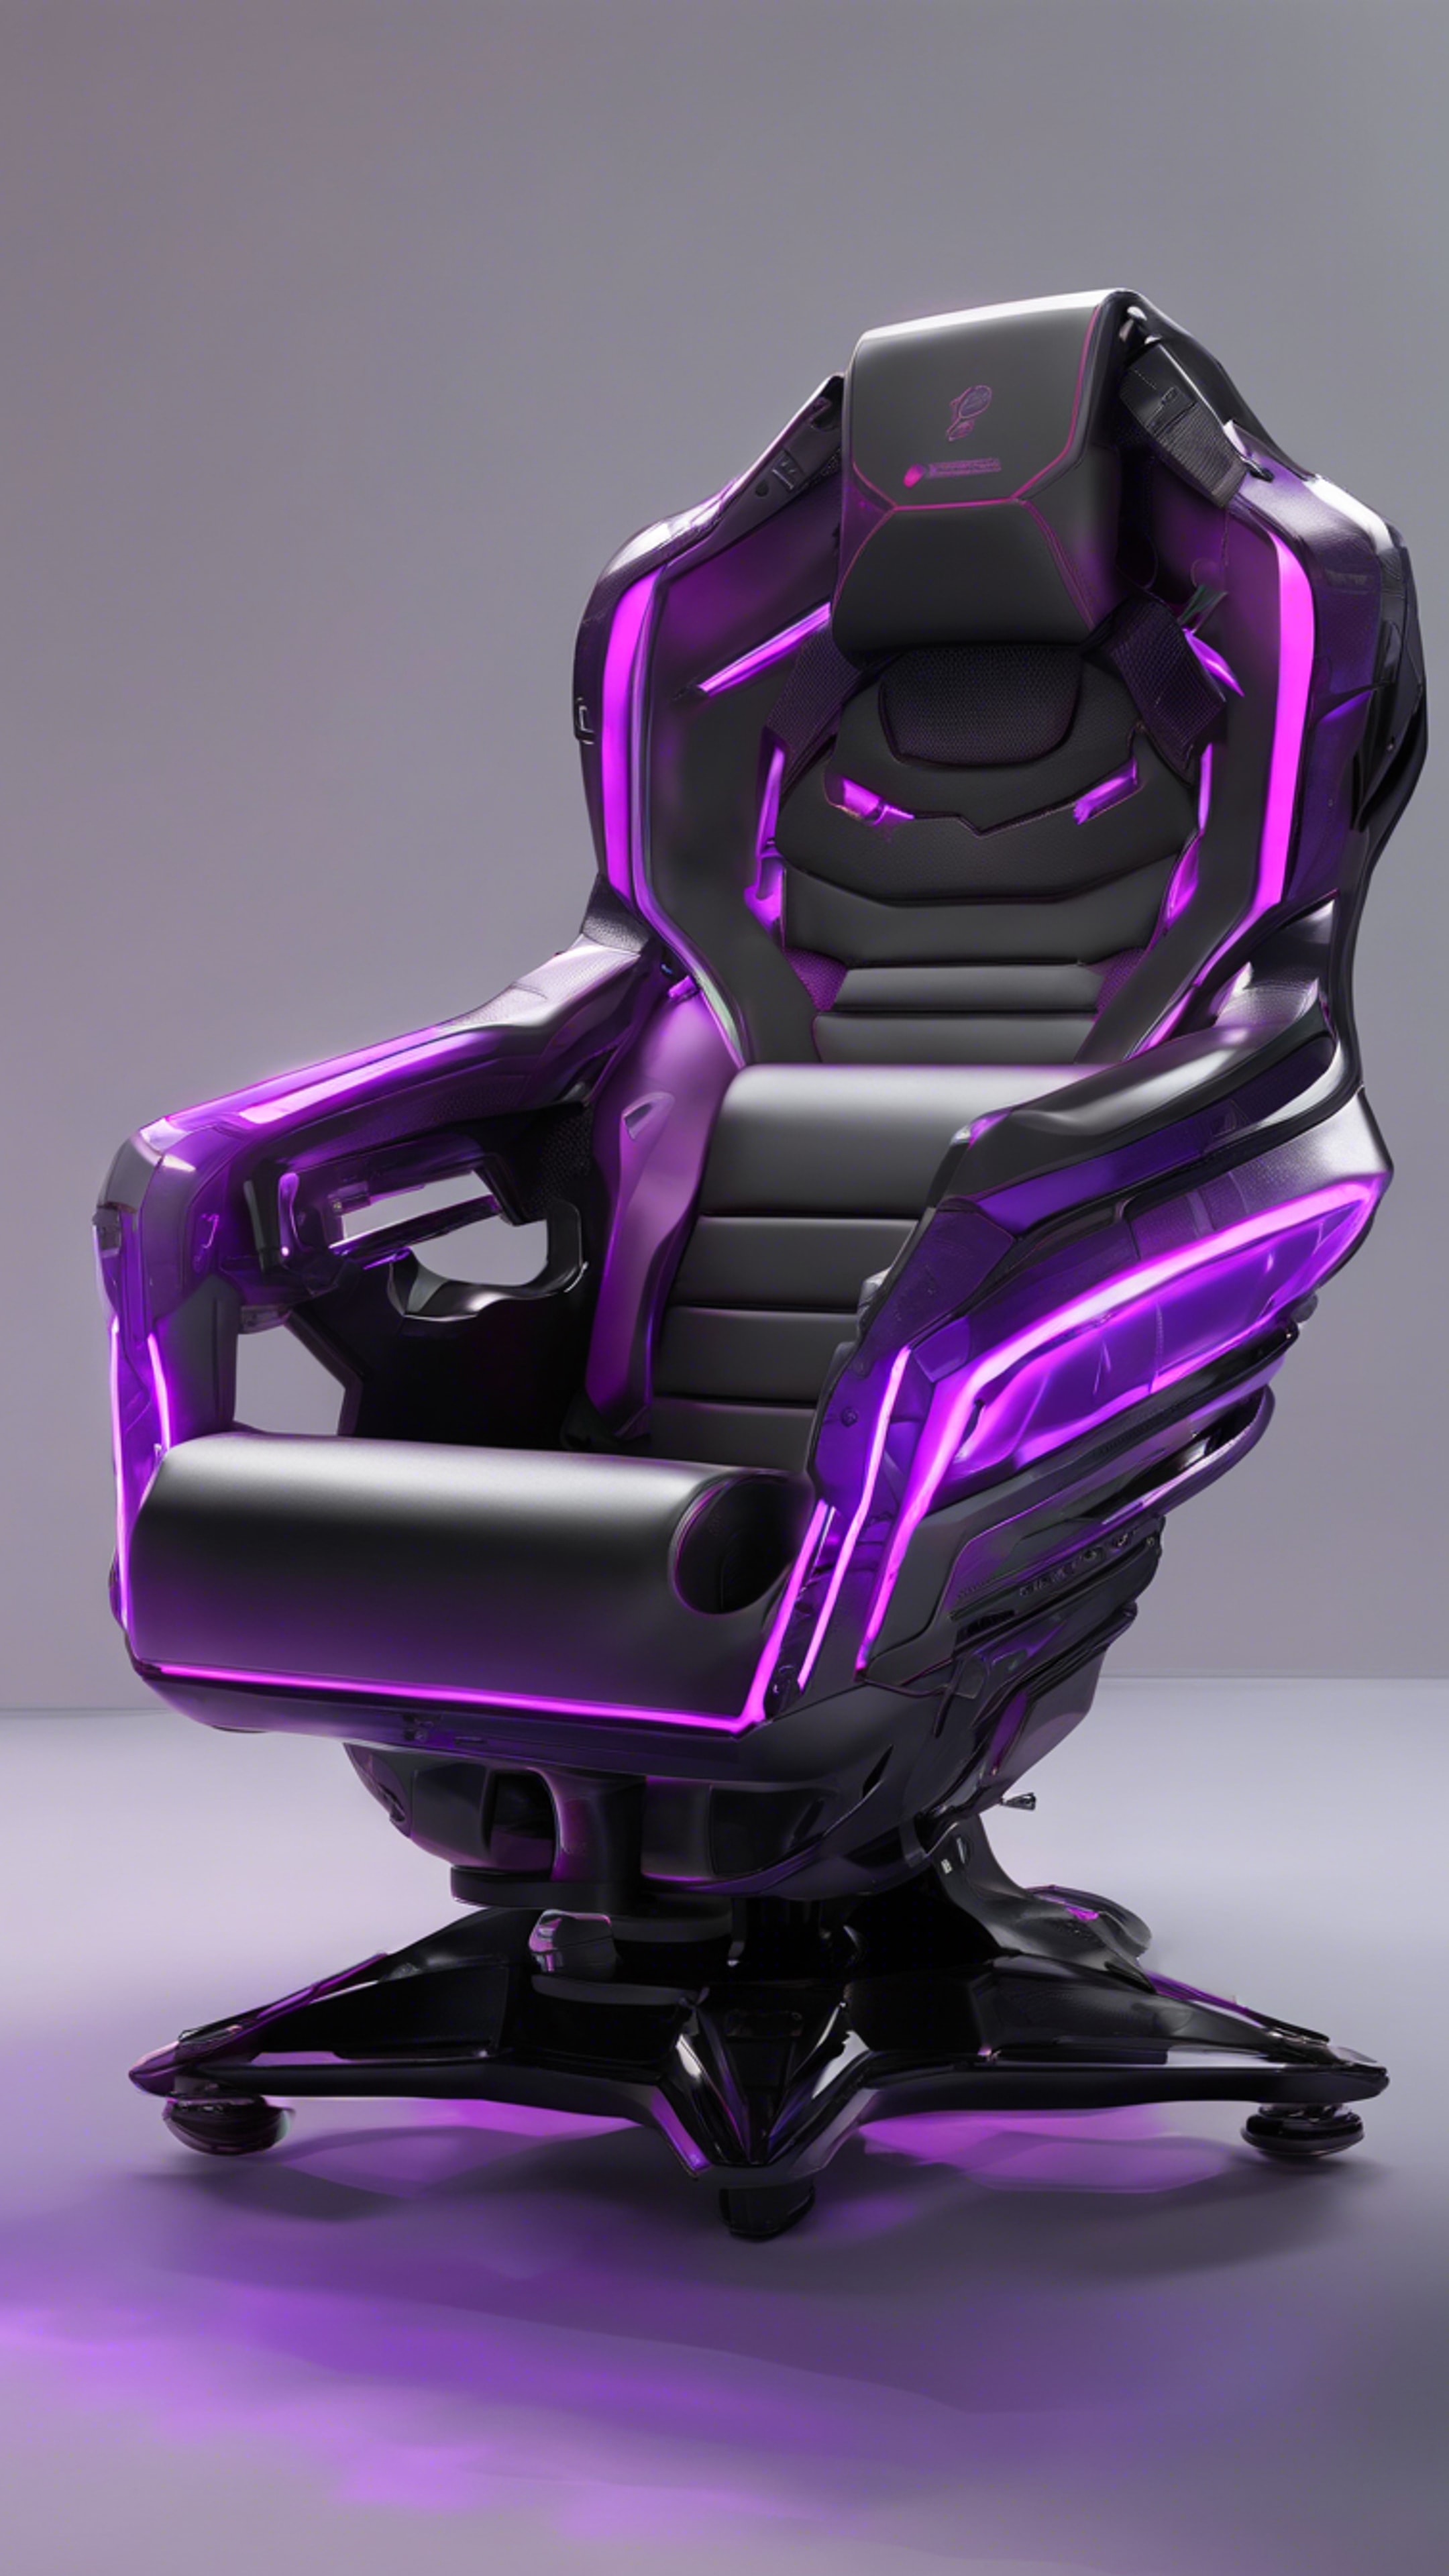 A futuristic gaming chair, jet black with neon purple accents, situated in a high-tech gaming station. Тапет[77c4183ef08040e08e97]